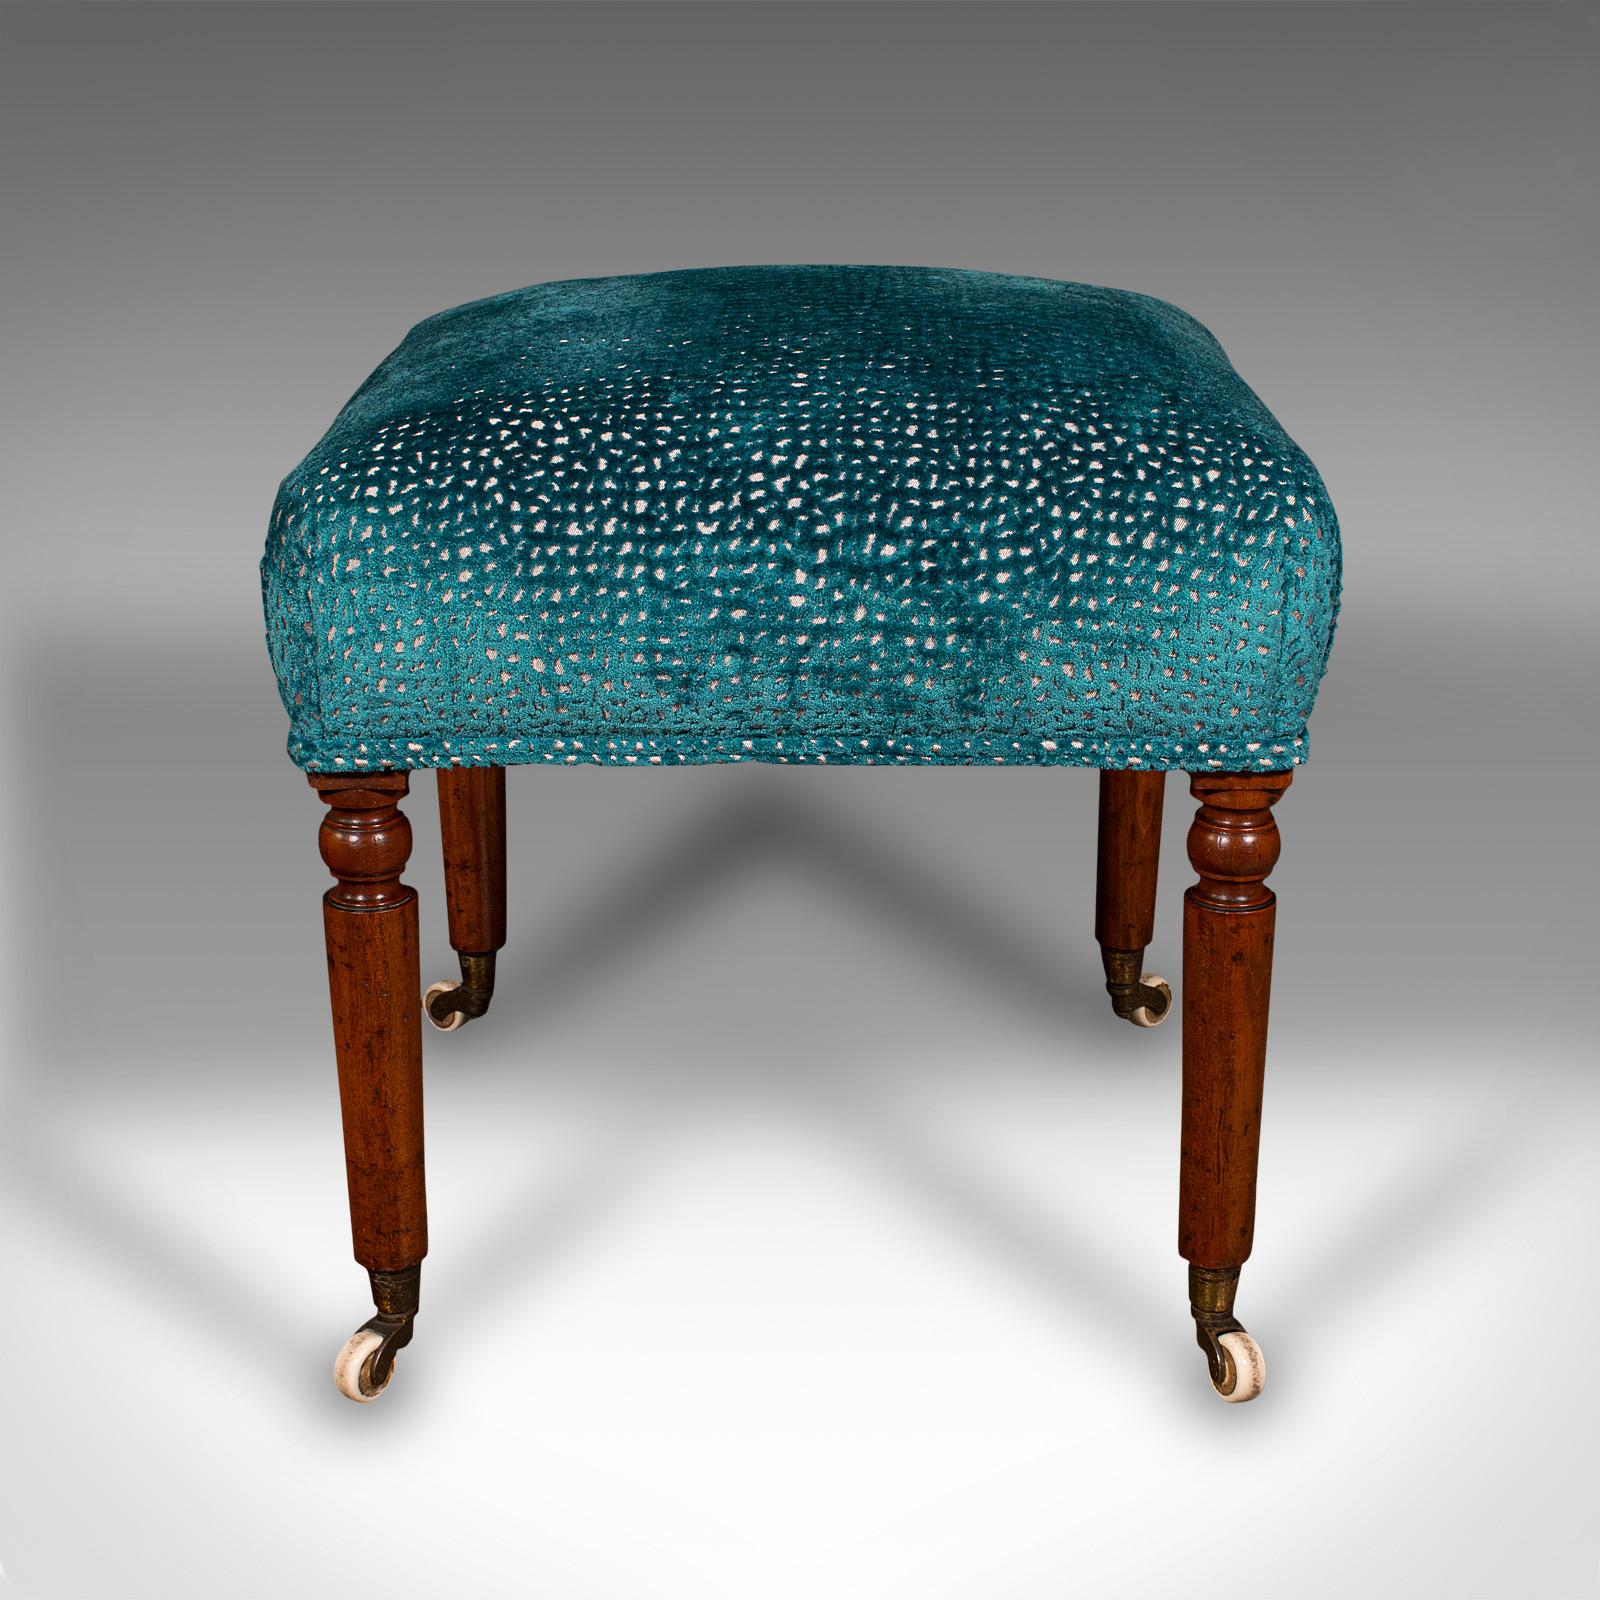 19th Century Antique Dressing Stool, English, Chenille Upholstery, Footstool, Regency, C.1820 For Sale